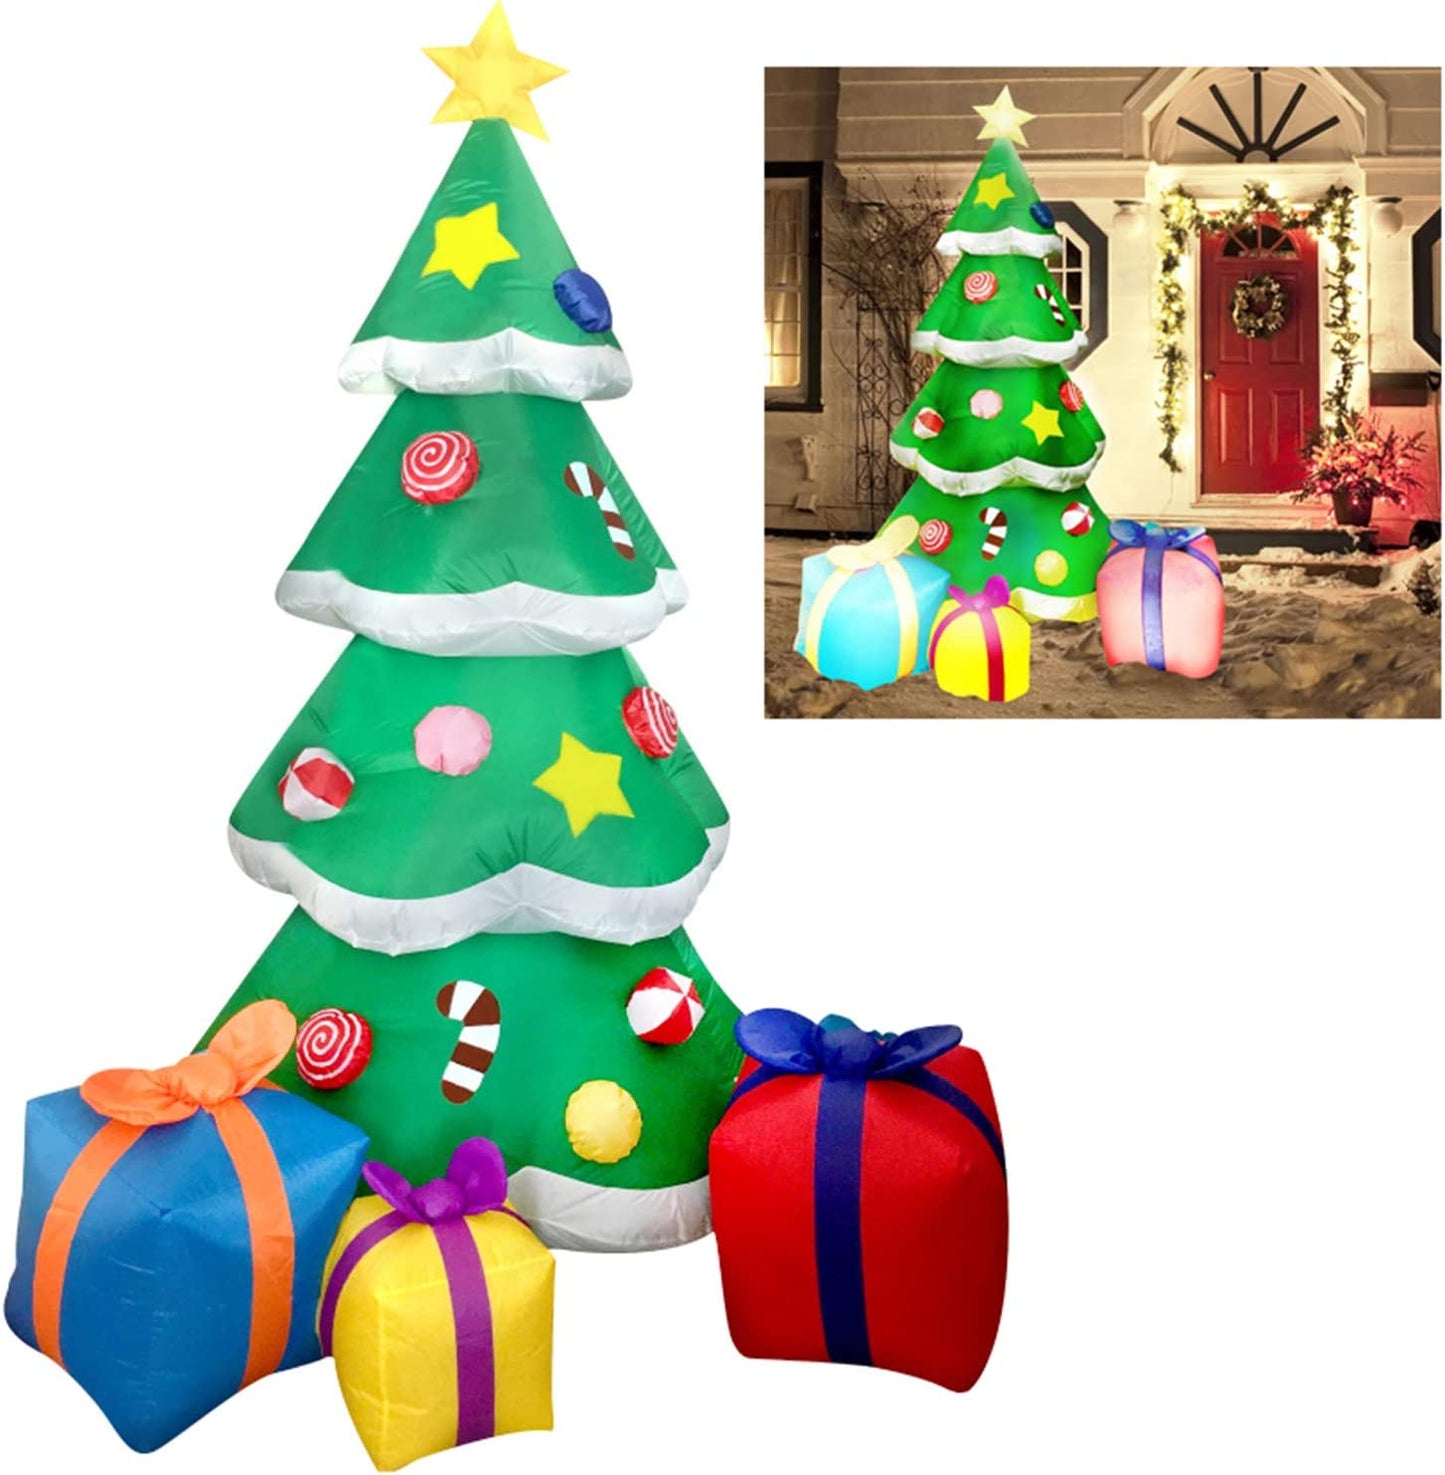 Large Christmas Tree with Presents Inflatable (7 ft)